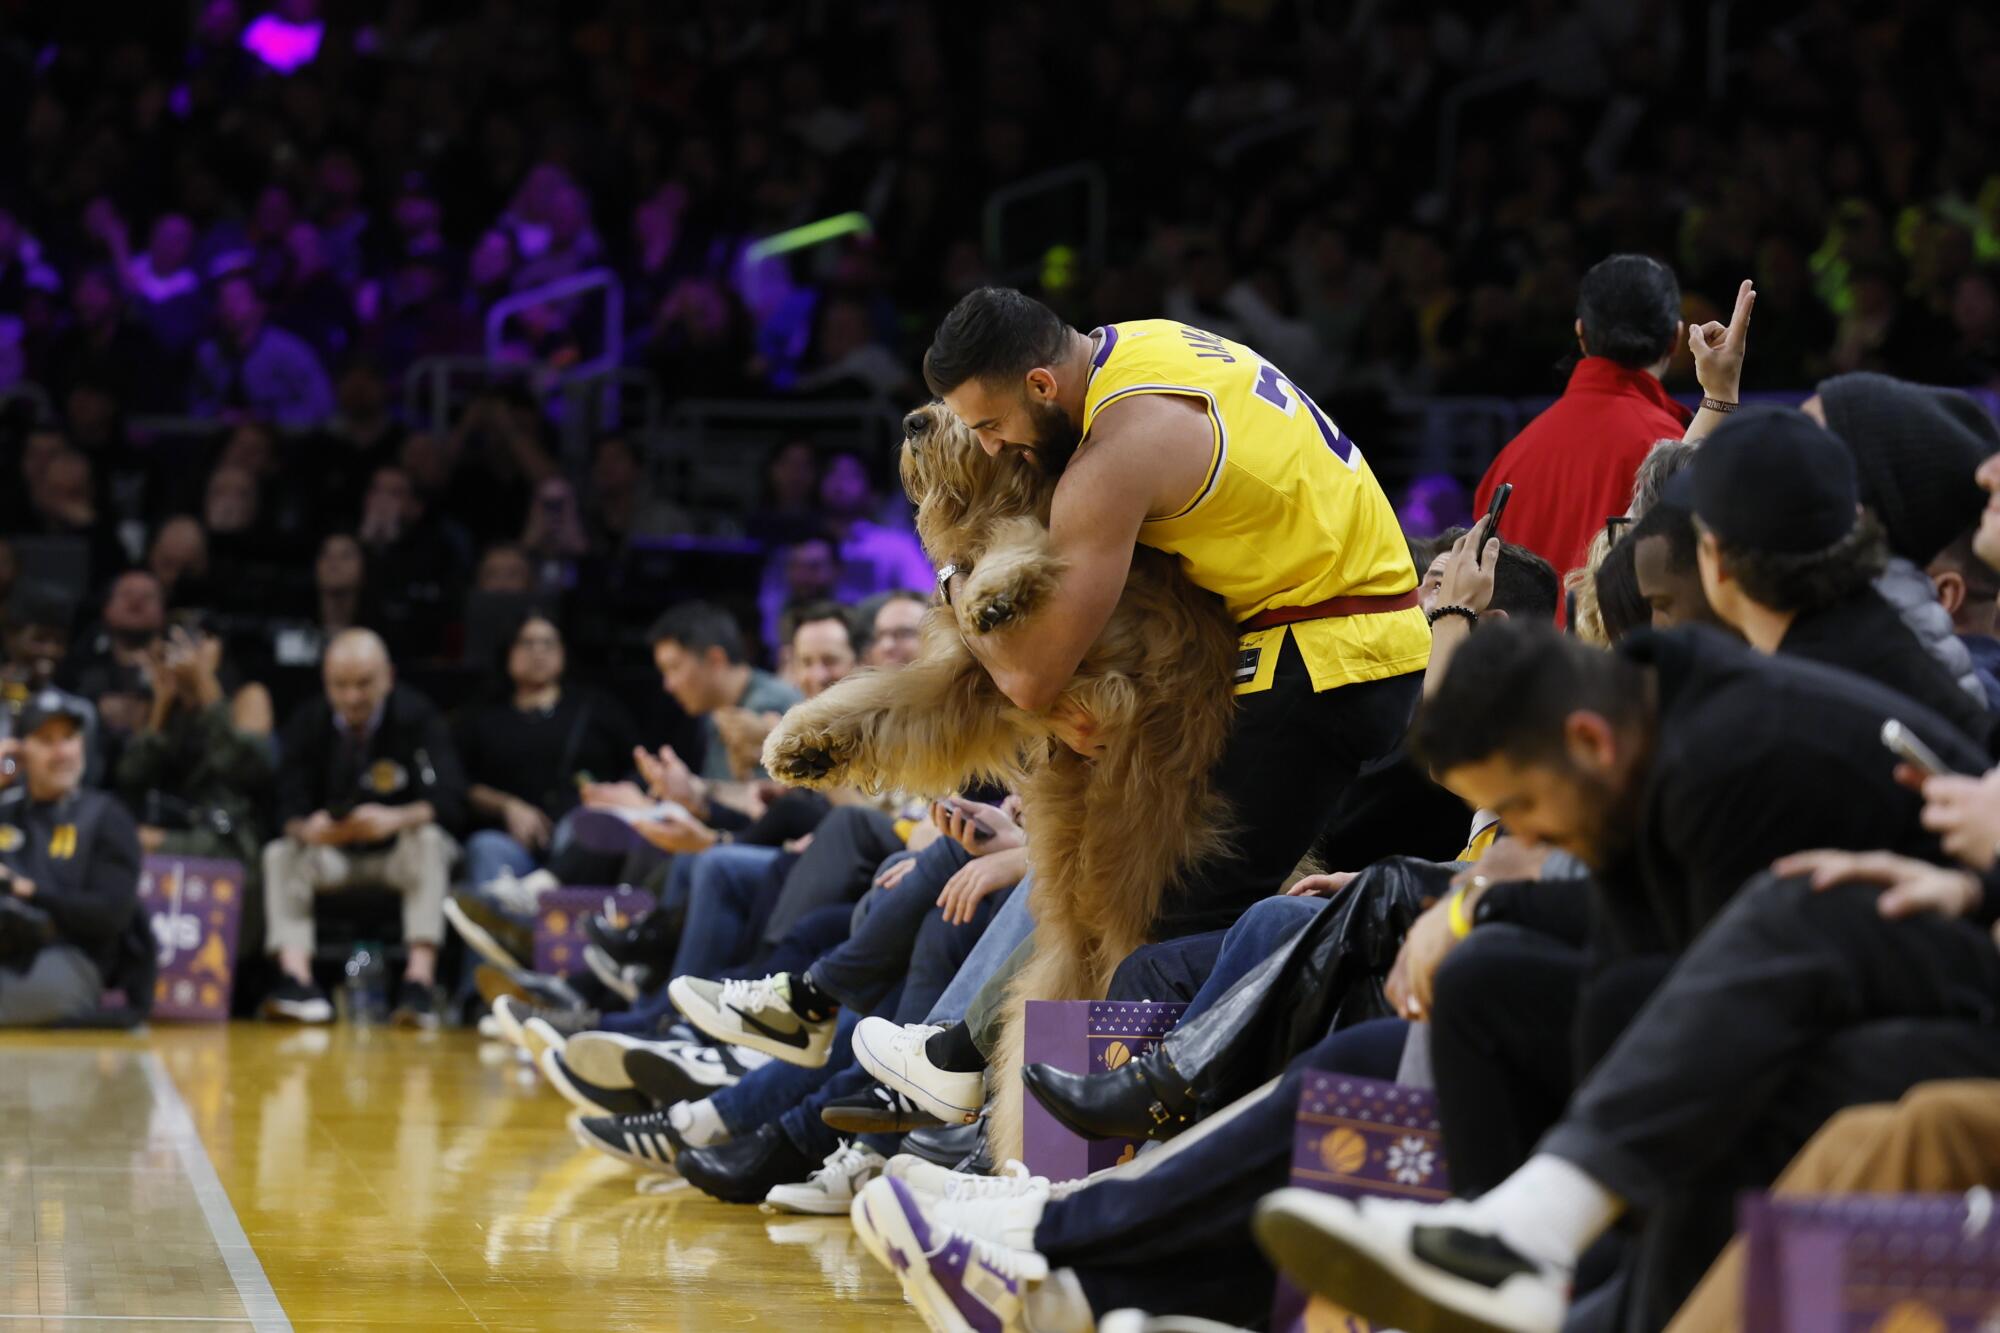 Cliff Brush Jr. hugs Brodie the Goldendoodle as they sit courtside at the Lakers-Knicks game.  